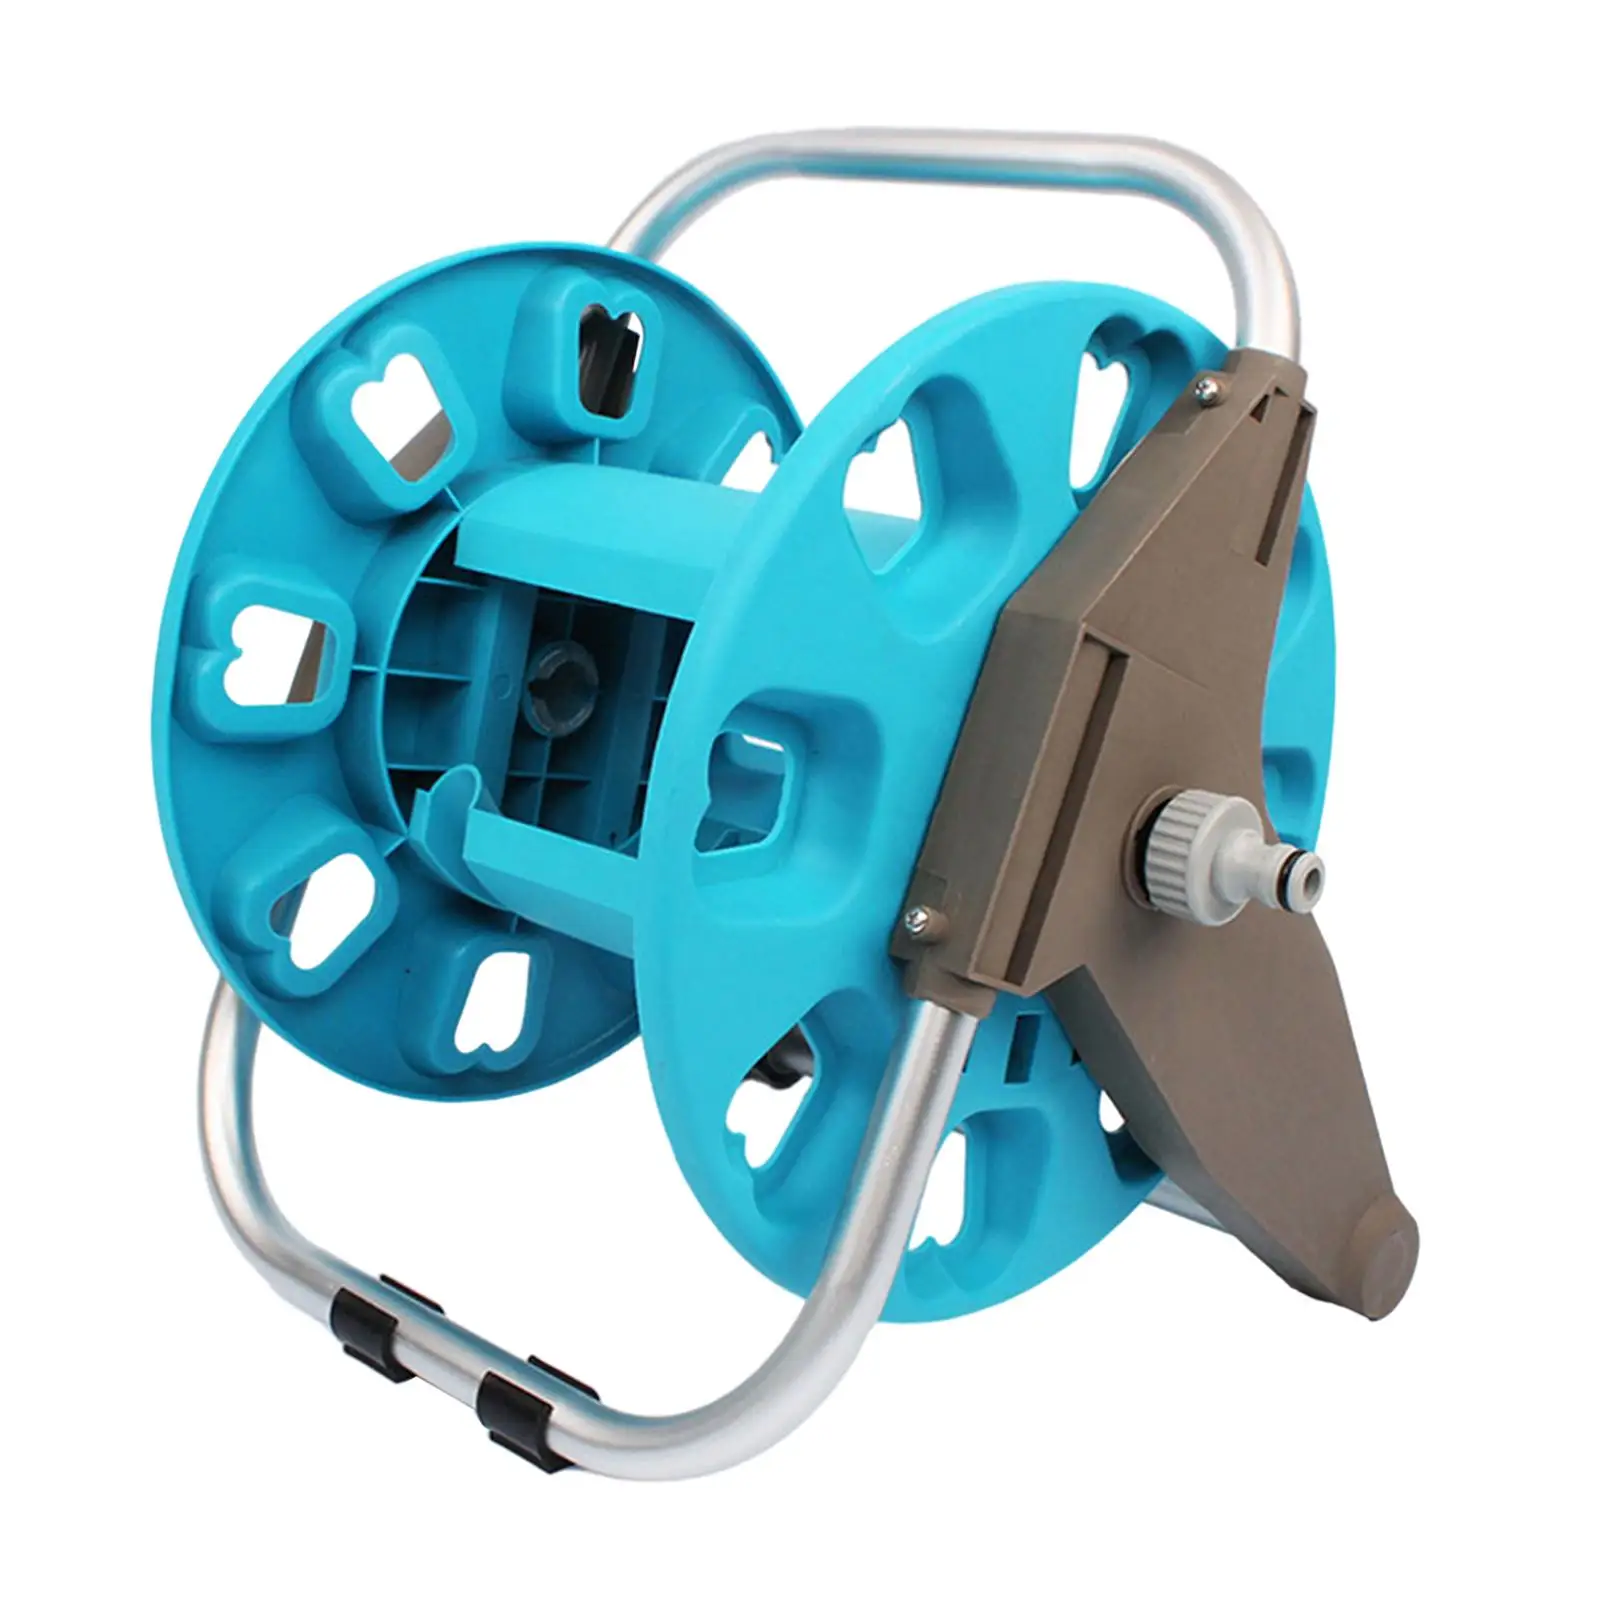 Garden Water Pipe Hose Reel Portable Durable Construction Water Hose Storage Stand Rack Holds 98.4 ft Hose Hose Pipe Organizer